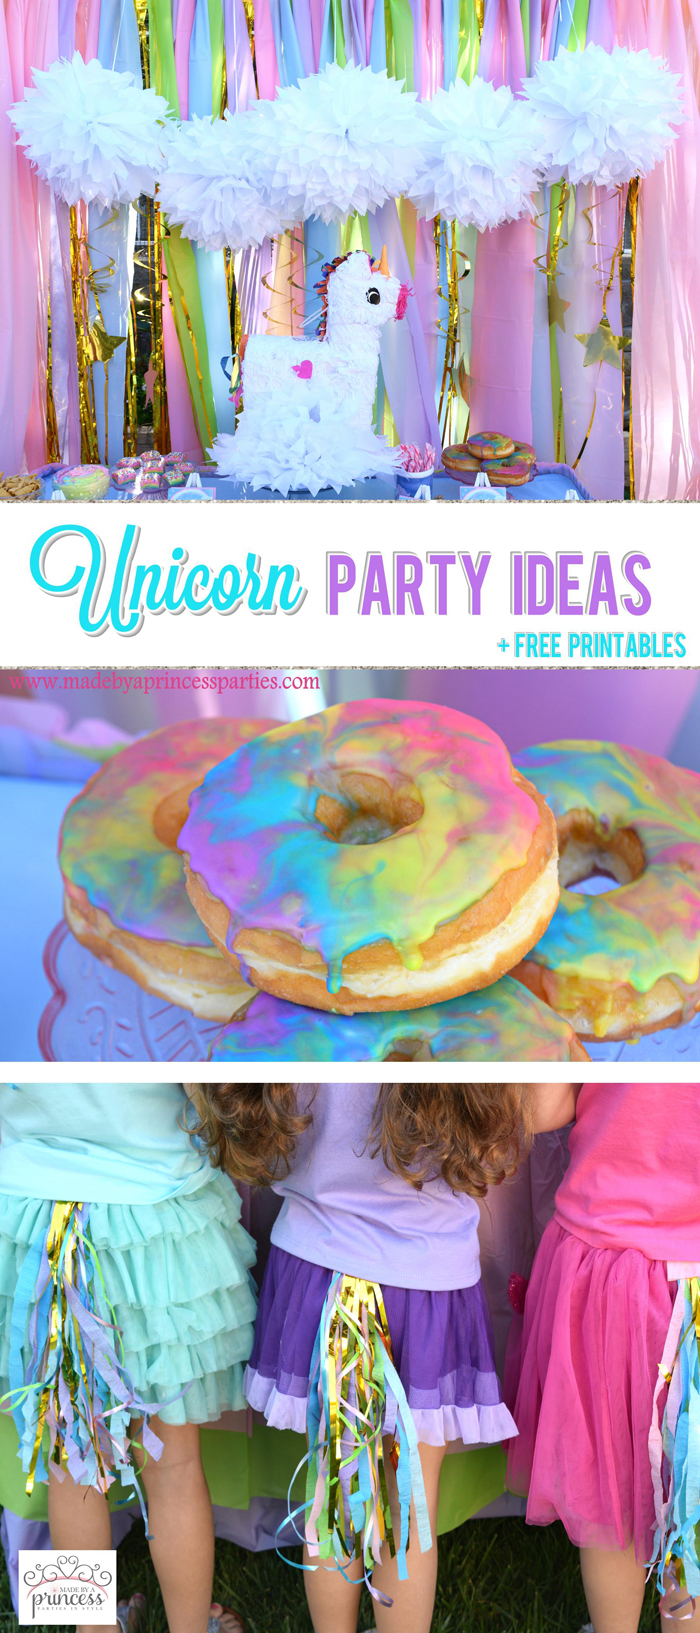 Host a magical and unforgettable unicorn party with these UNICORN PARTY IDEAS! Everything from food to decor to DIYs to party favors...post is packed with ideas you can easily recreate! #unicorn #unicornparty #magicalparty #partyideas